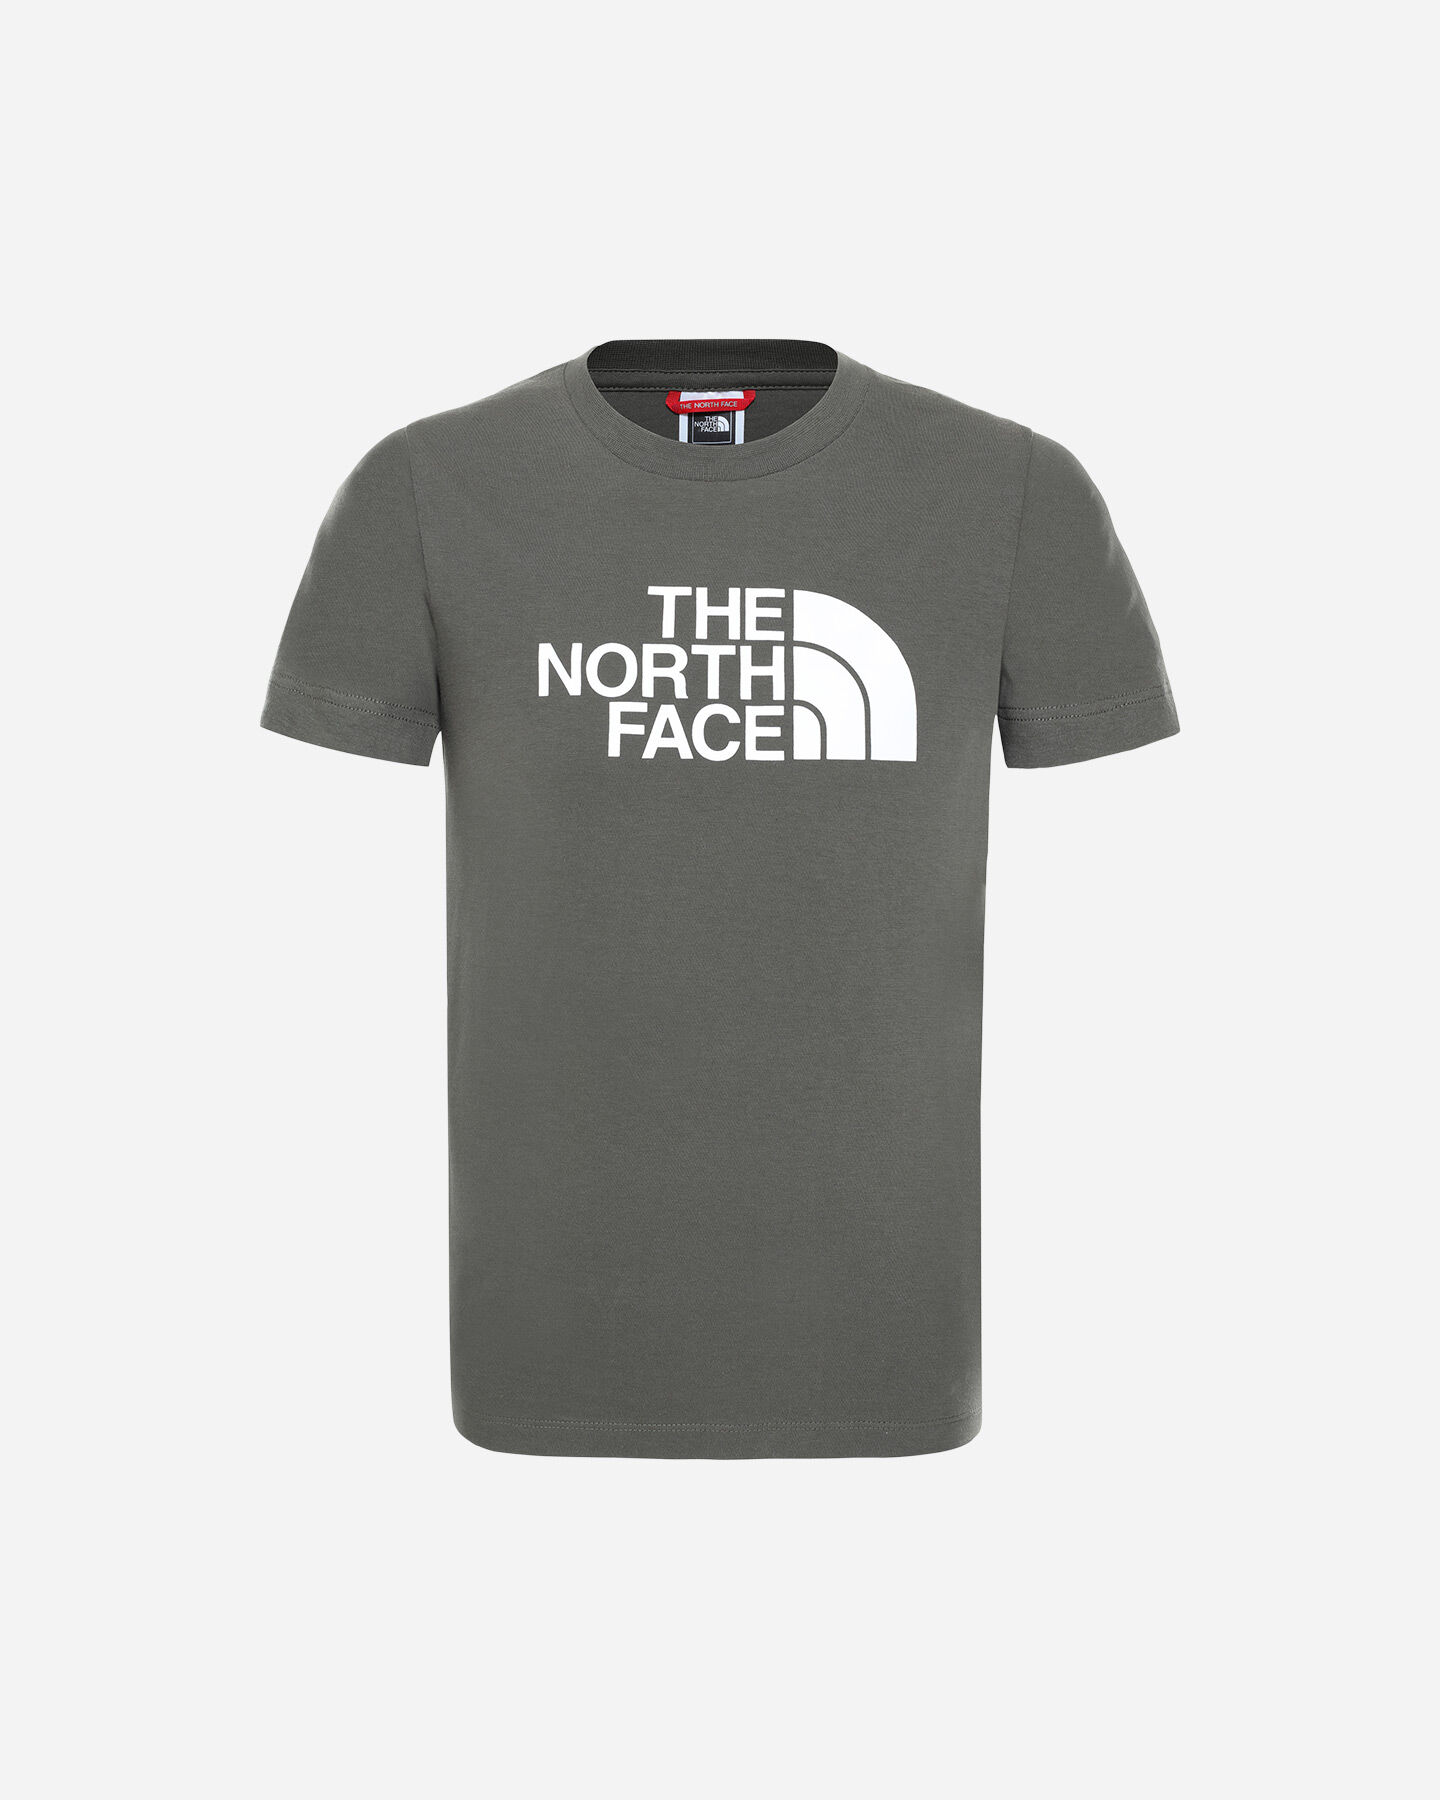  T-Shirt THE NORTH FACE EASY  JR S5241414|KR5|S scatto 0